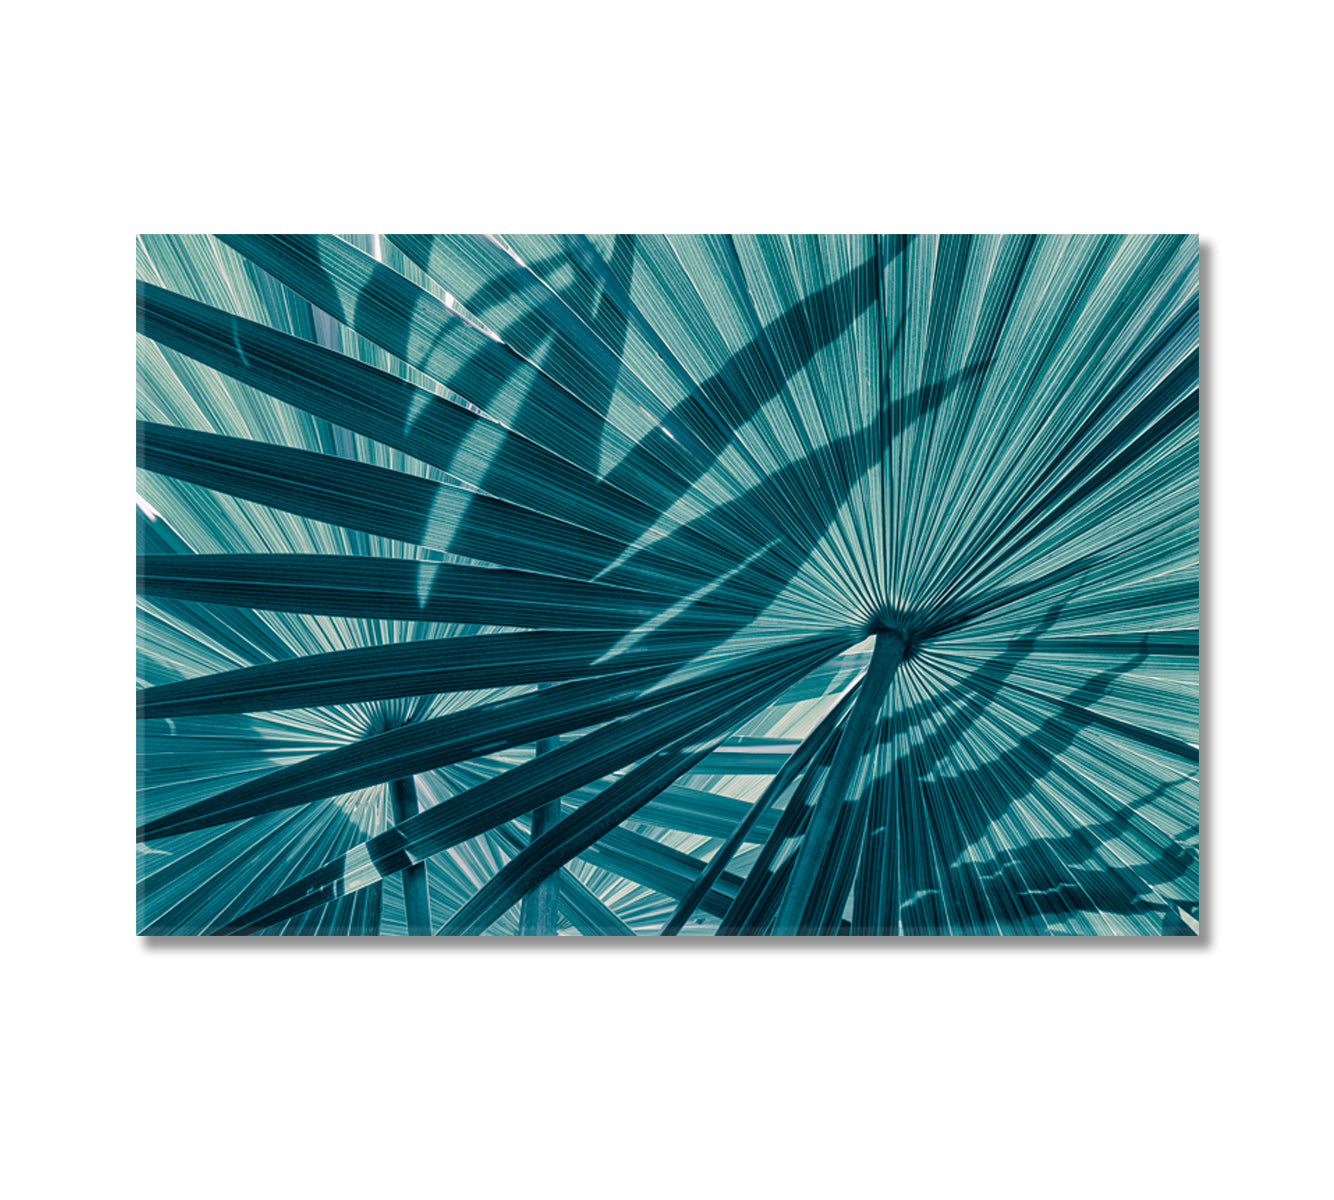 Abstract Tropical Leaves Canvas Print-Canvas Print-CetArt-1 Panel-24x16 inches-CetArt